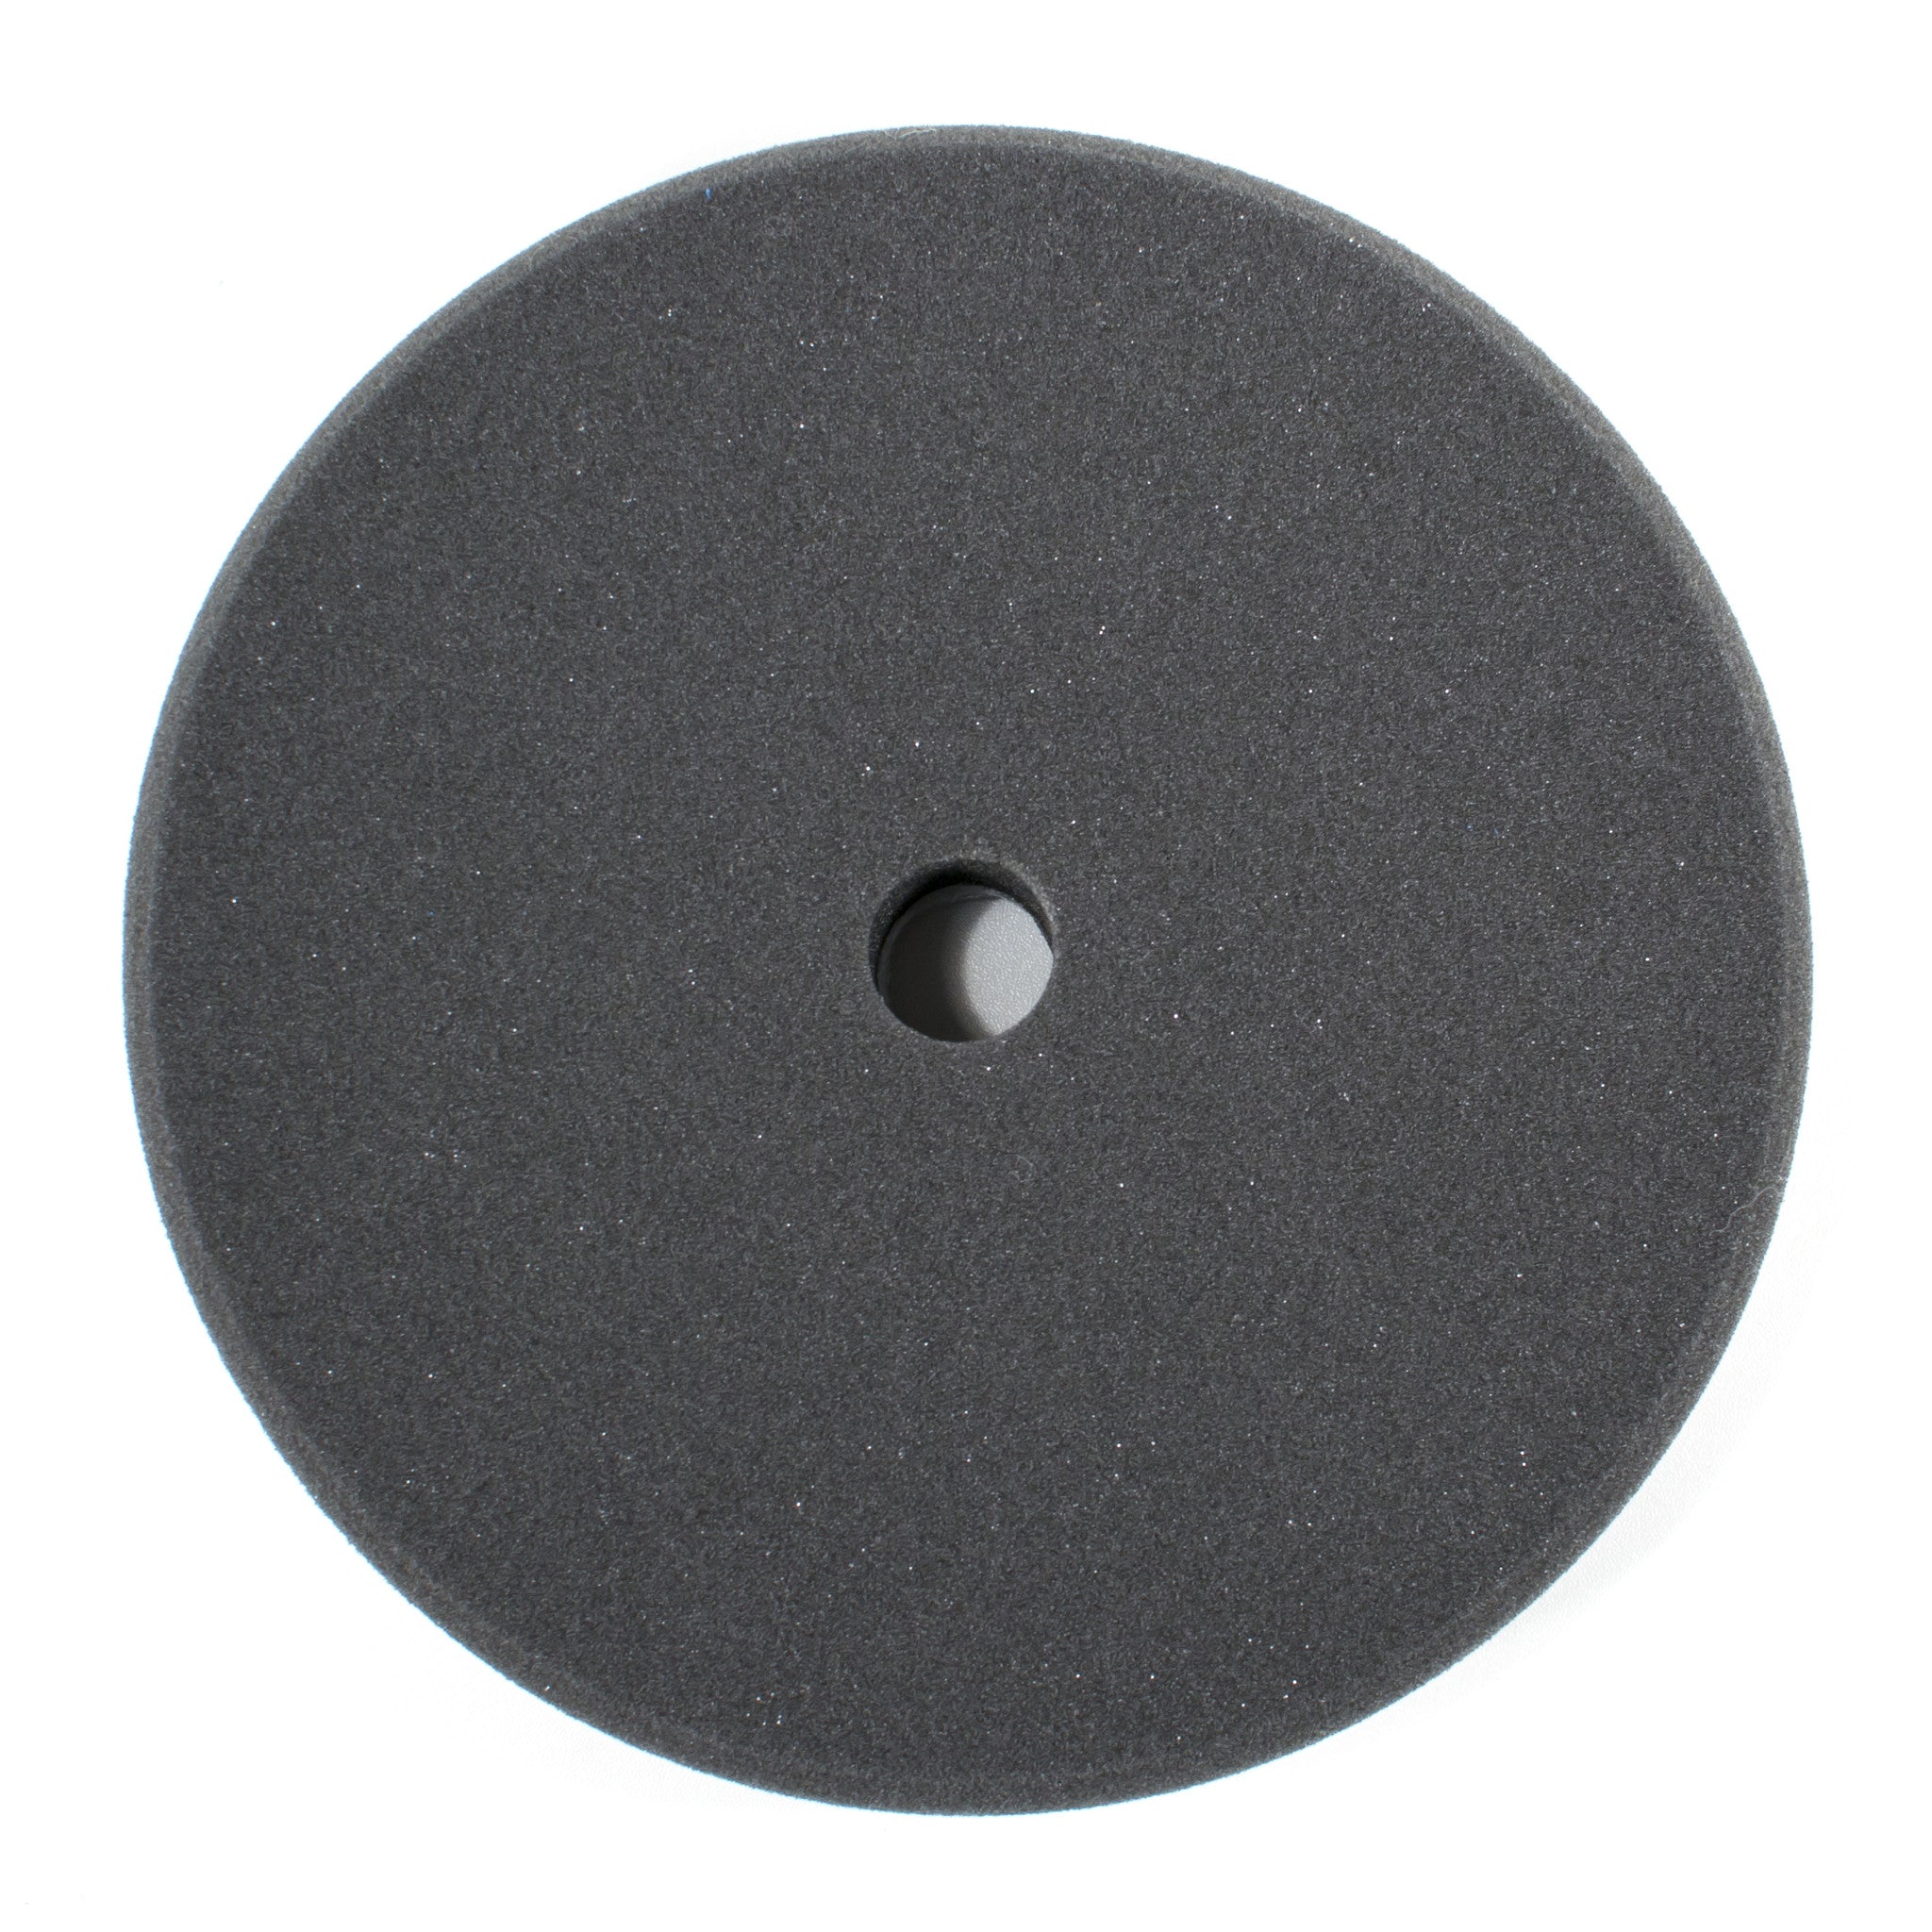 BUFF and SHINE 8" Black Recessed Foam Buffing Pad - Finishing #2000G Recessed backing protects painted surfaces from backing plate edges  Recommended for Rotary Polishers Reticulated Polyester Foam Material Application: Finishing Made in USA Thickness: 2" Diameter: 8"